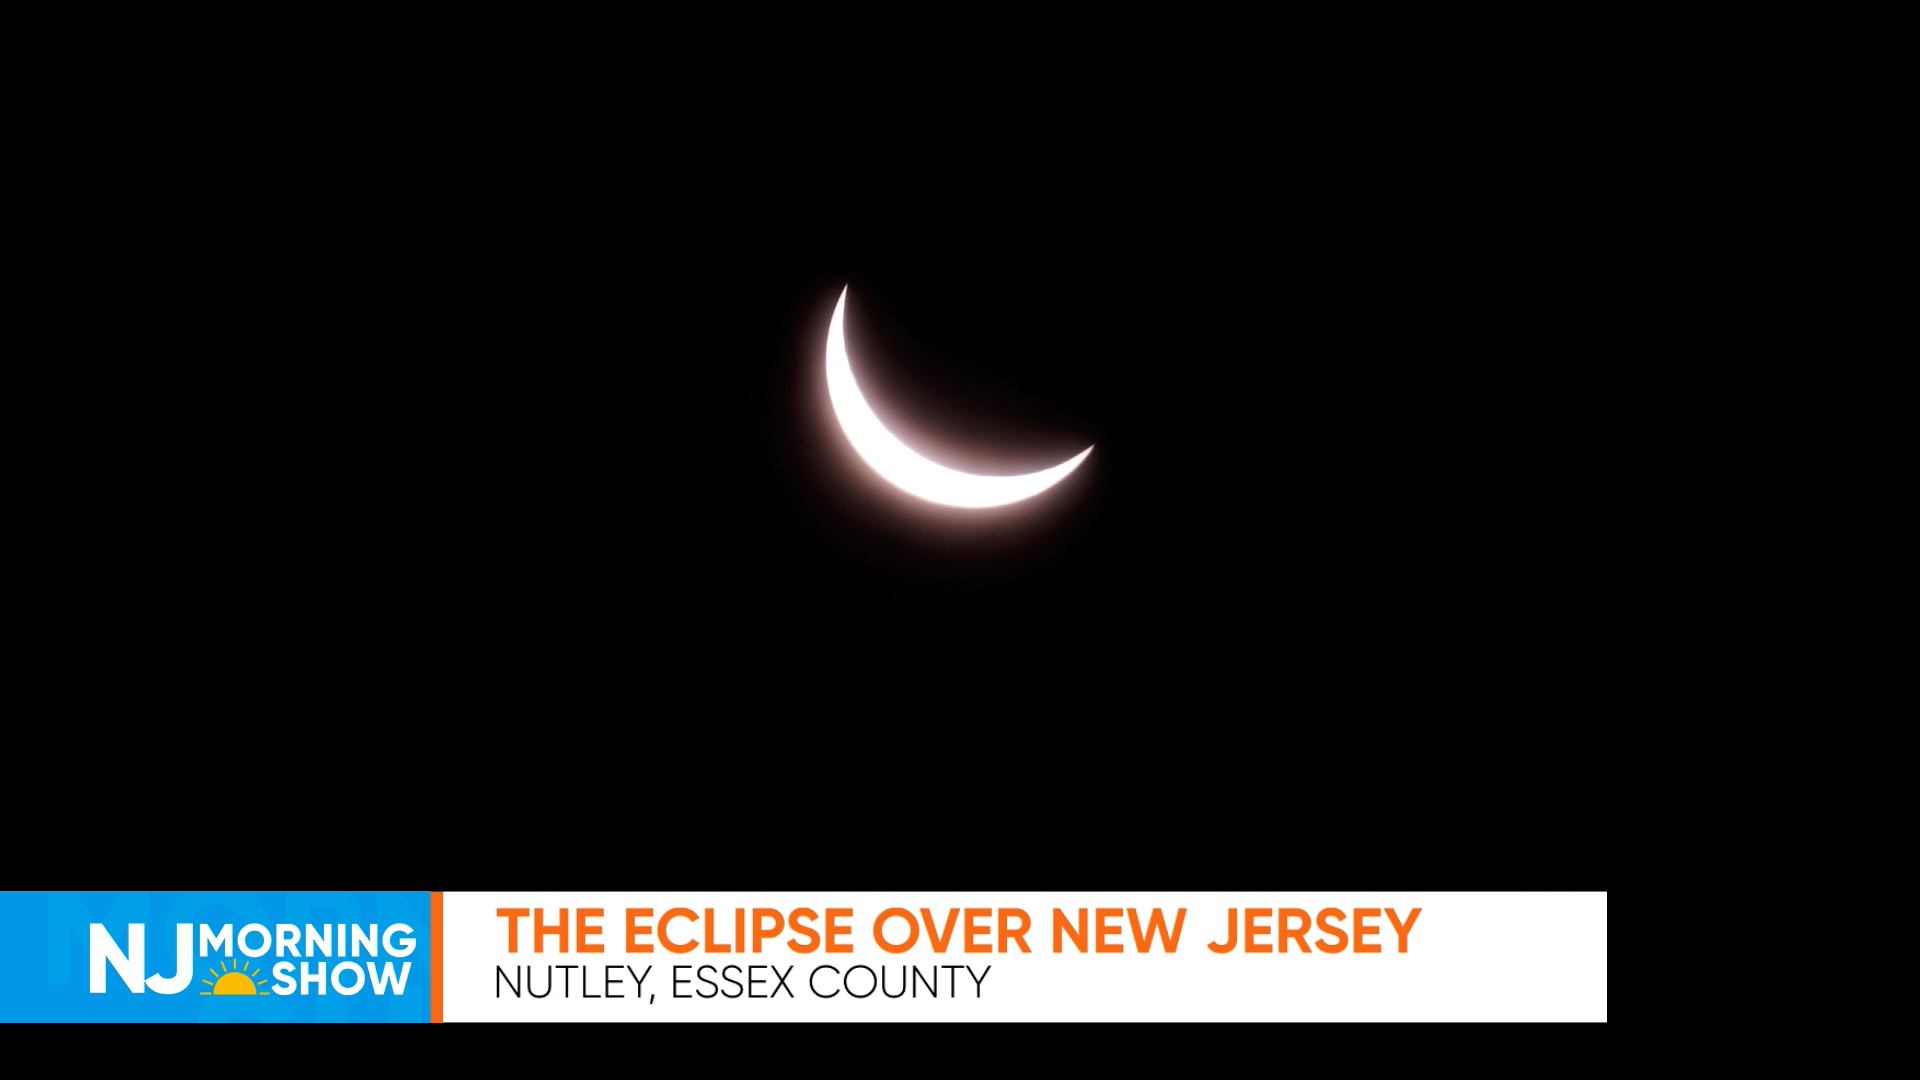 NJ Morning Show – The Eclipse Over New Jersey